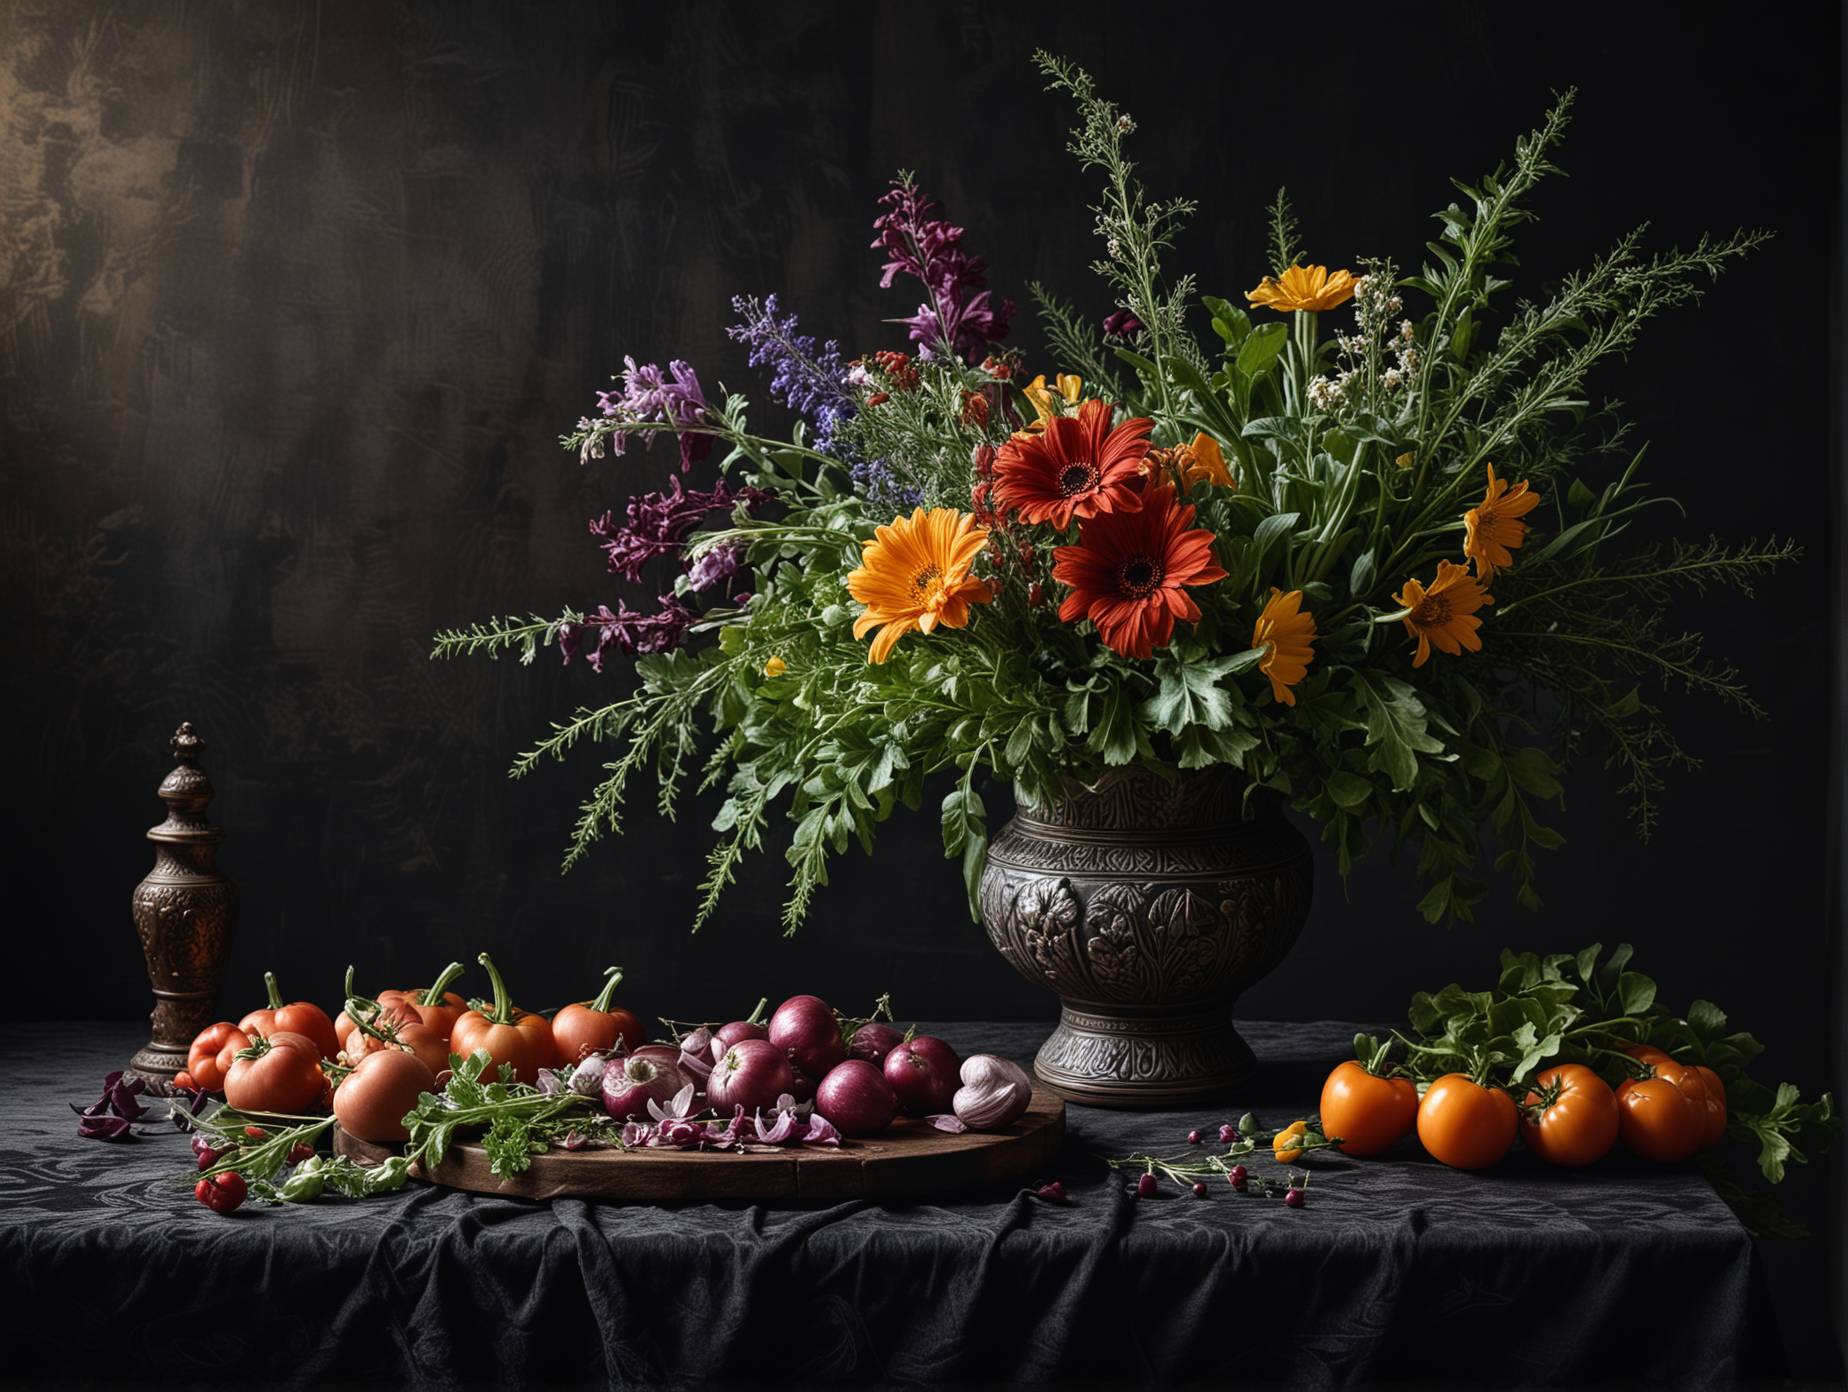 Still life with flowers in a beautiful engraved vase, vegetables and herbs, one diffused light source, an old table, dark colors, a stone draped dark velvet fabric